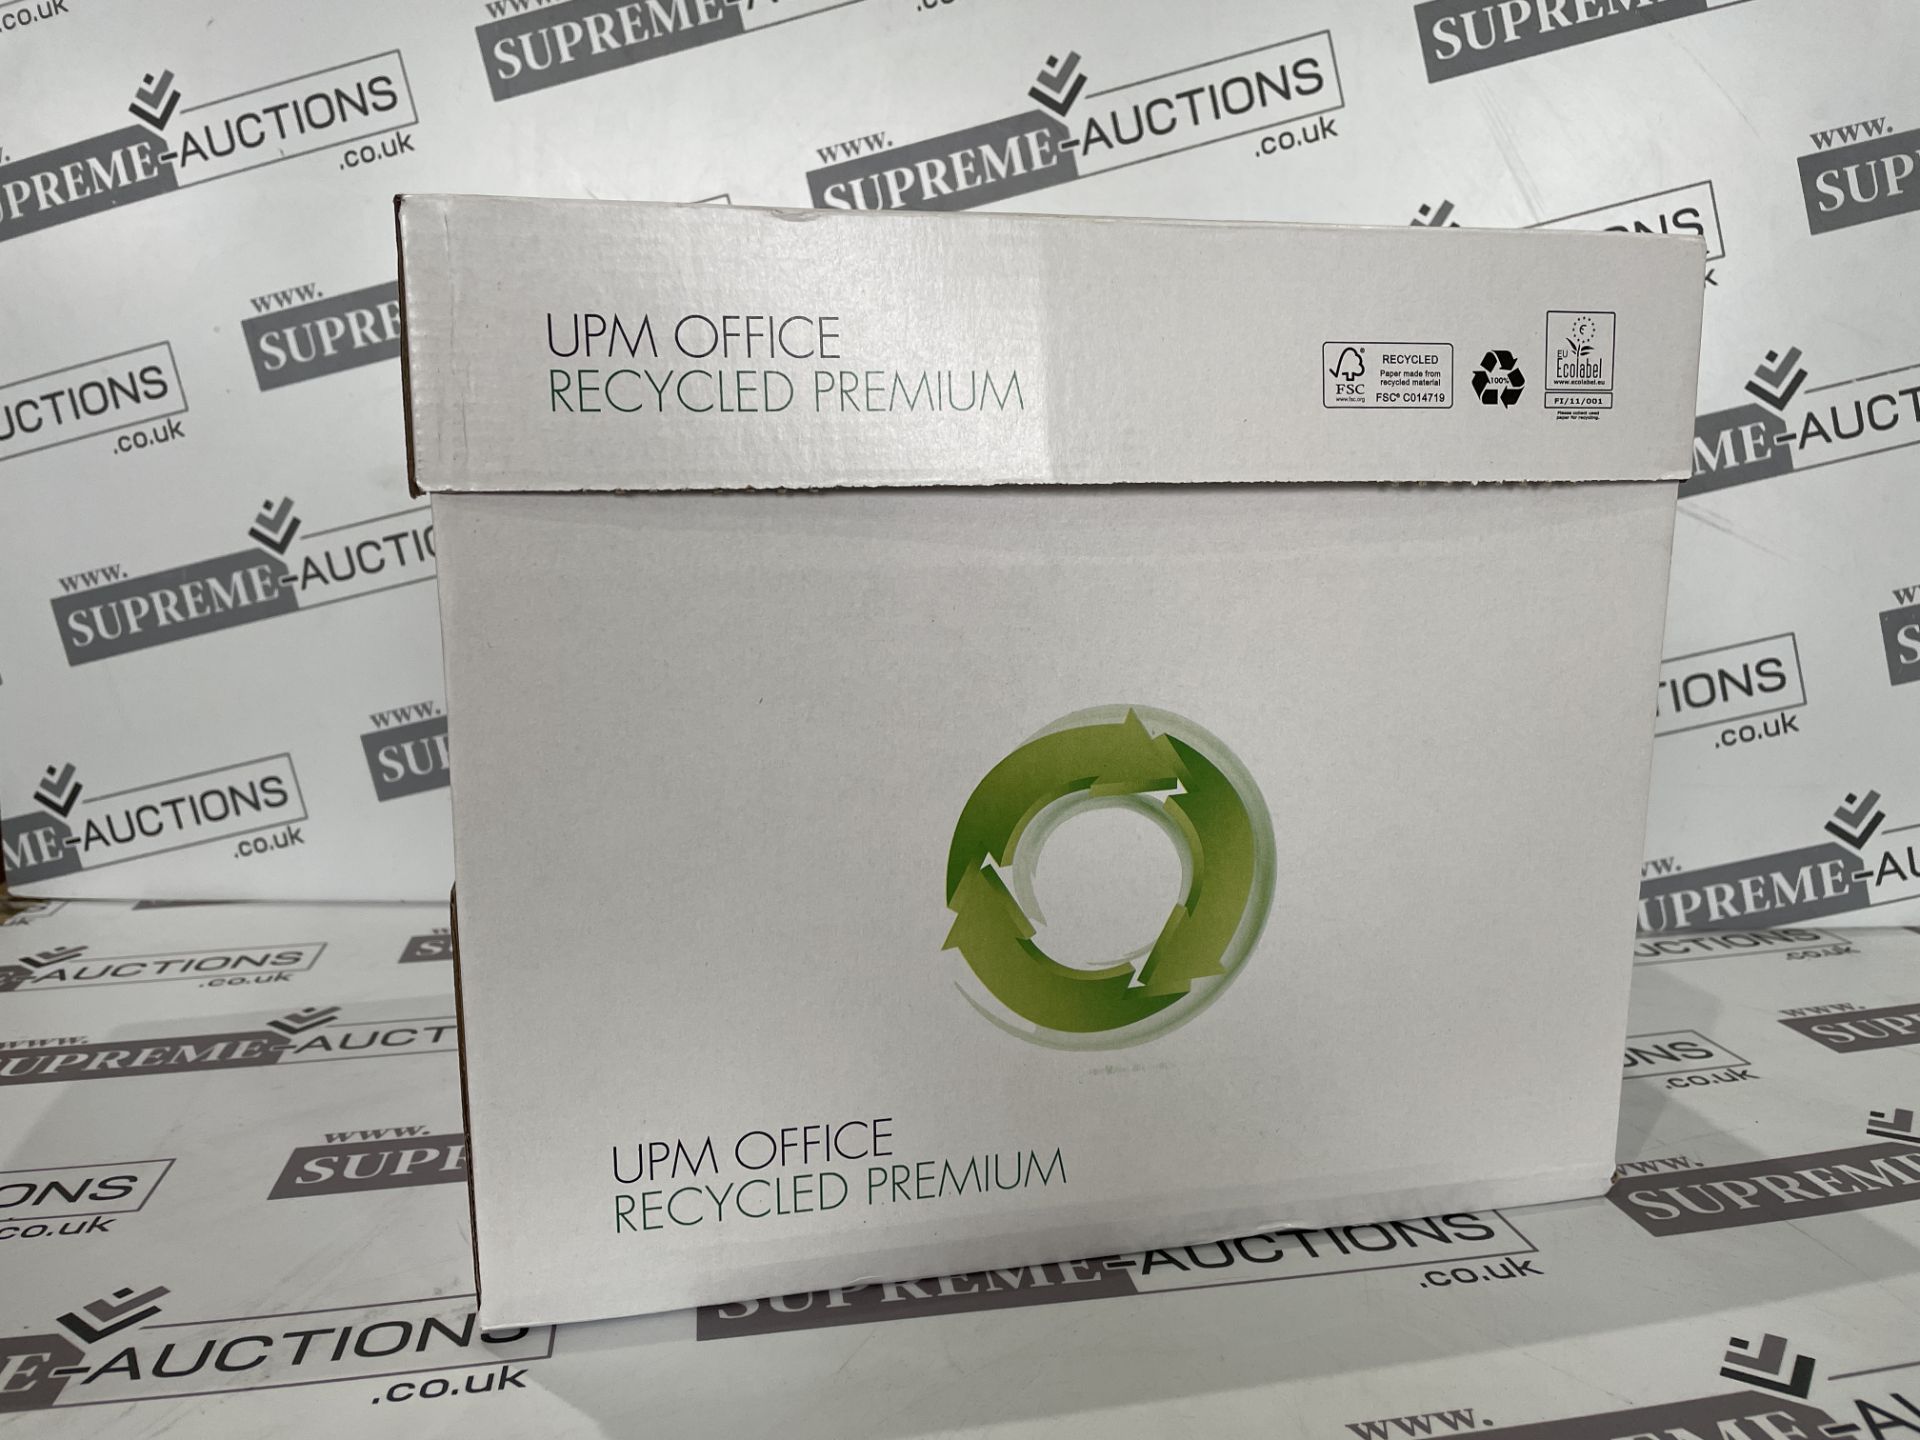 30 X BRAND NEW PACKS OF 500 UPM OFFICE RECYCLED PREMIUM A4 80 G/M2 PAPER IN 6 BOXES R16-12